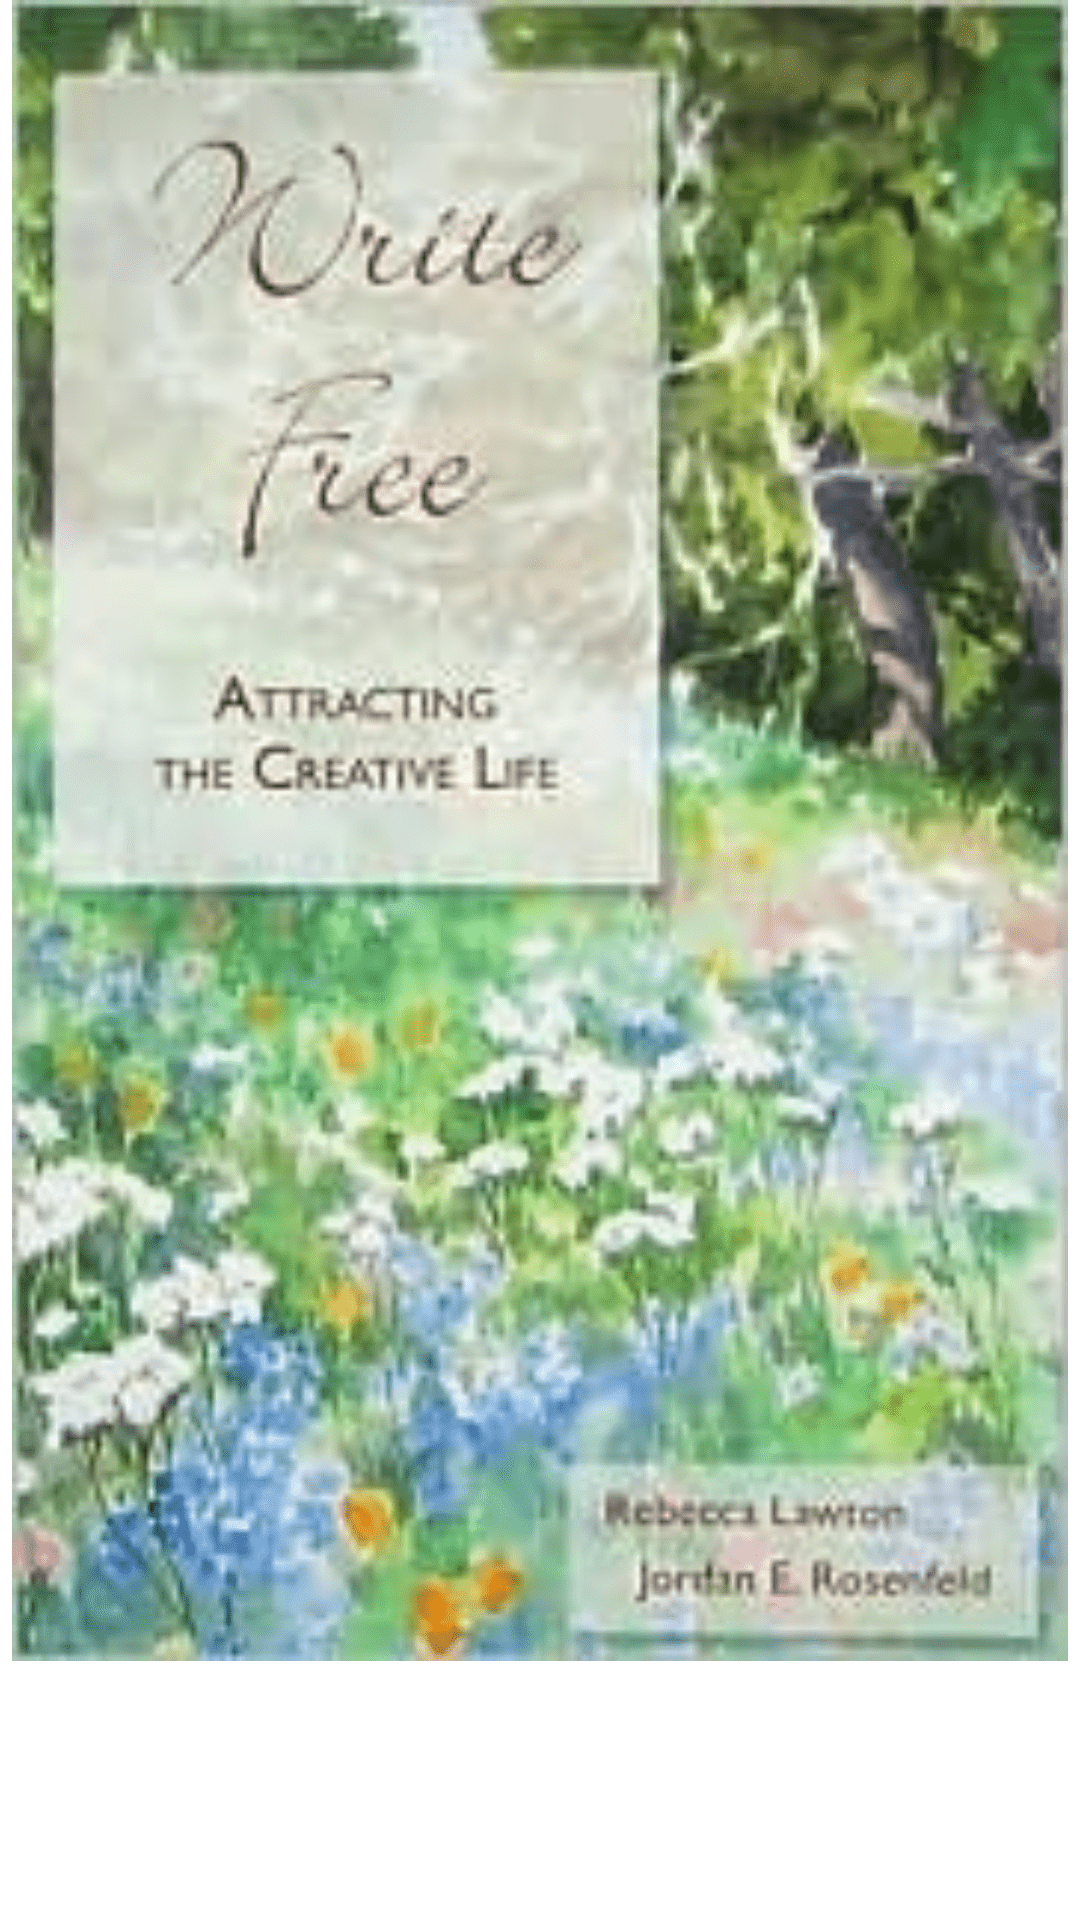 Write Free: Attracting the Creative Life